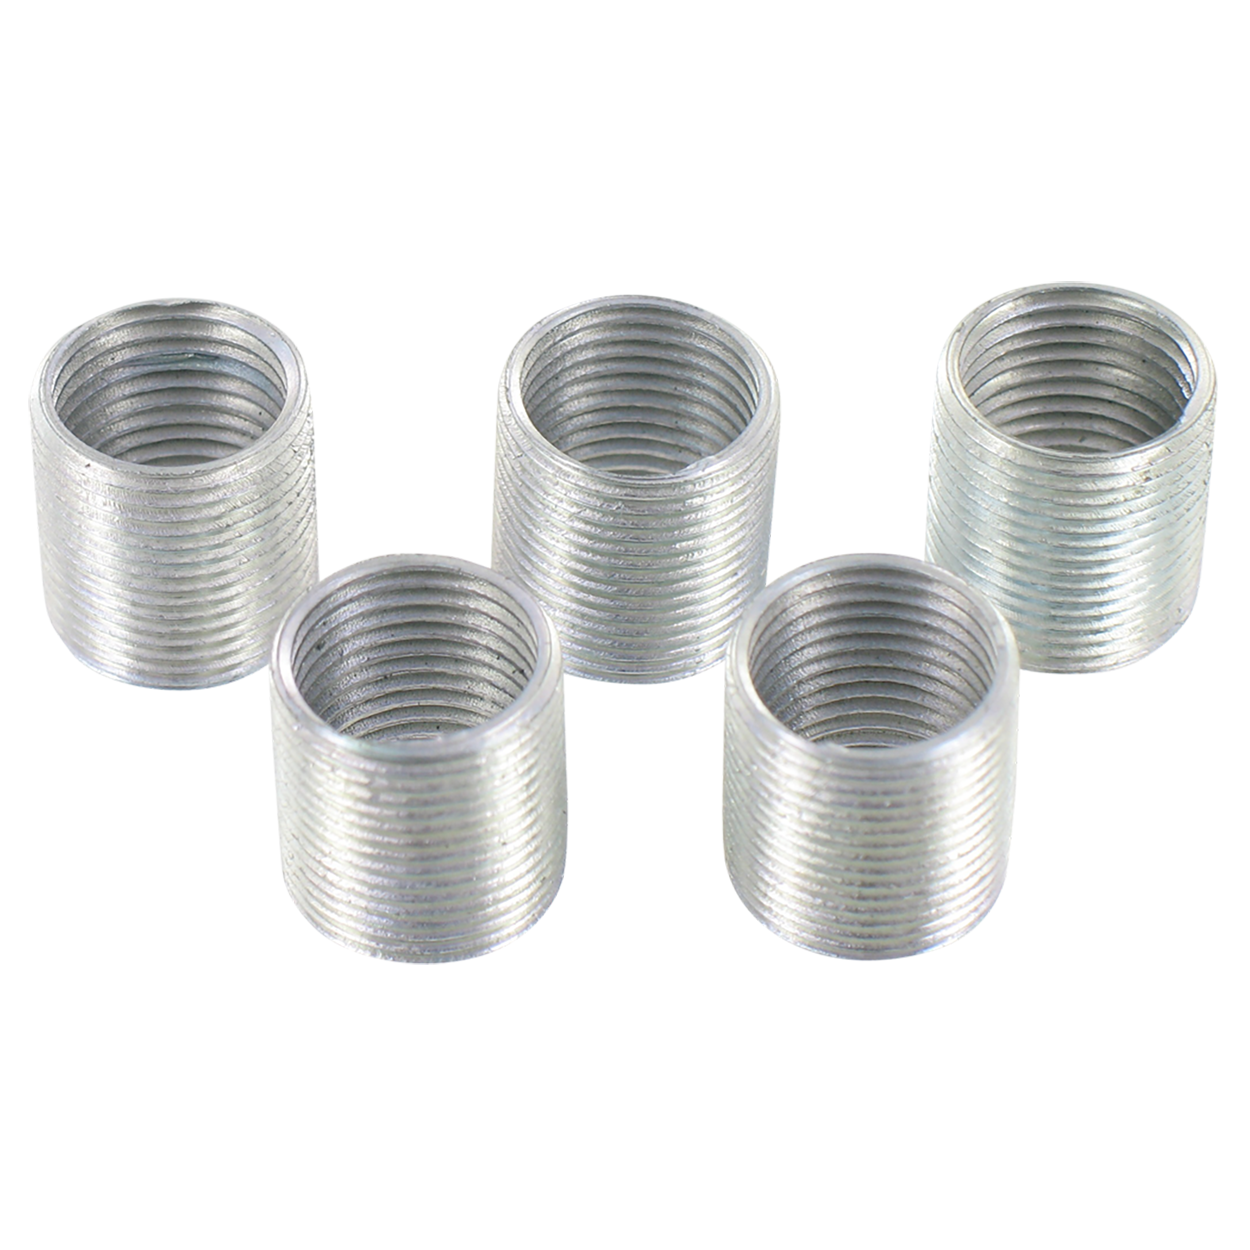 Set 5 replacement bushings 9/16"x20 tpi (left)